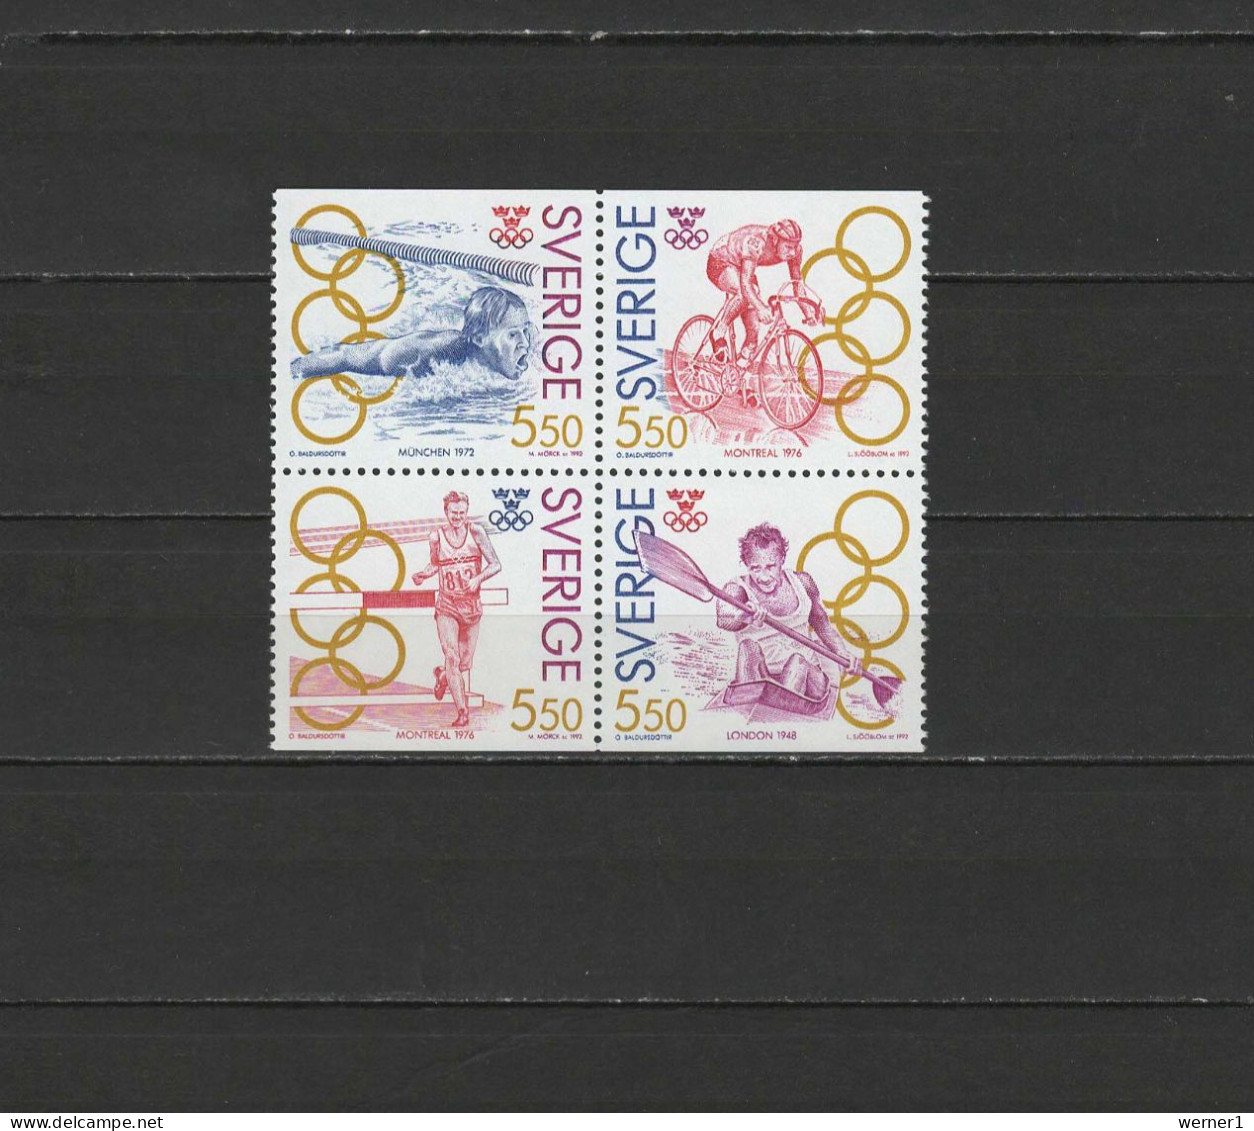 Sweden 1992 Olympic Games Barcelona, Swimming, Cycling, Athletics, Canoeing Block Of 4 MNH - Verano 1992: Barcelona